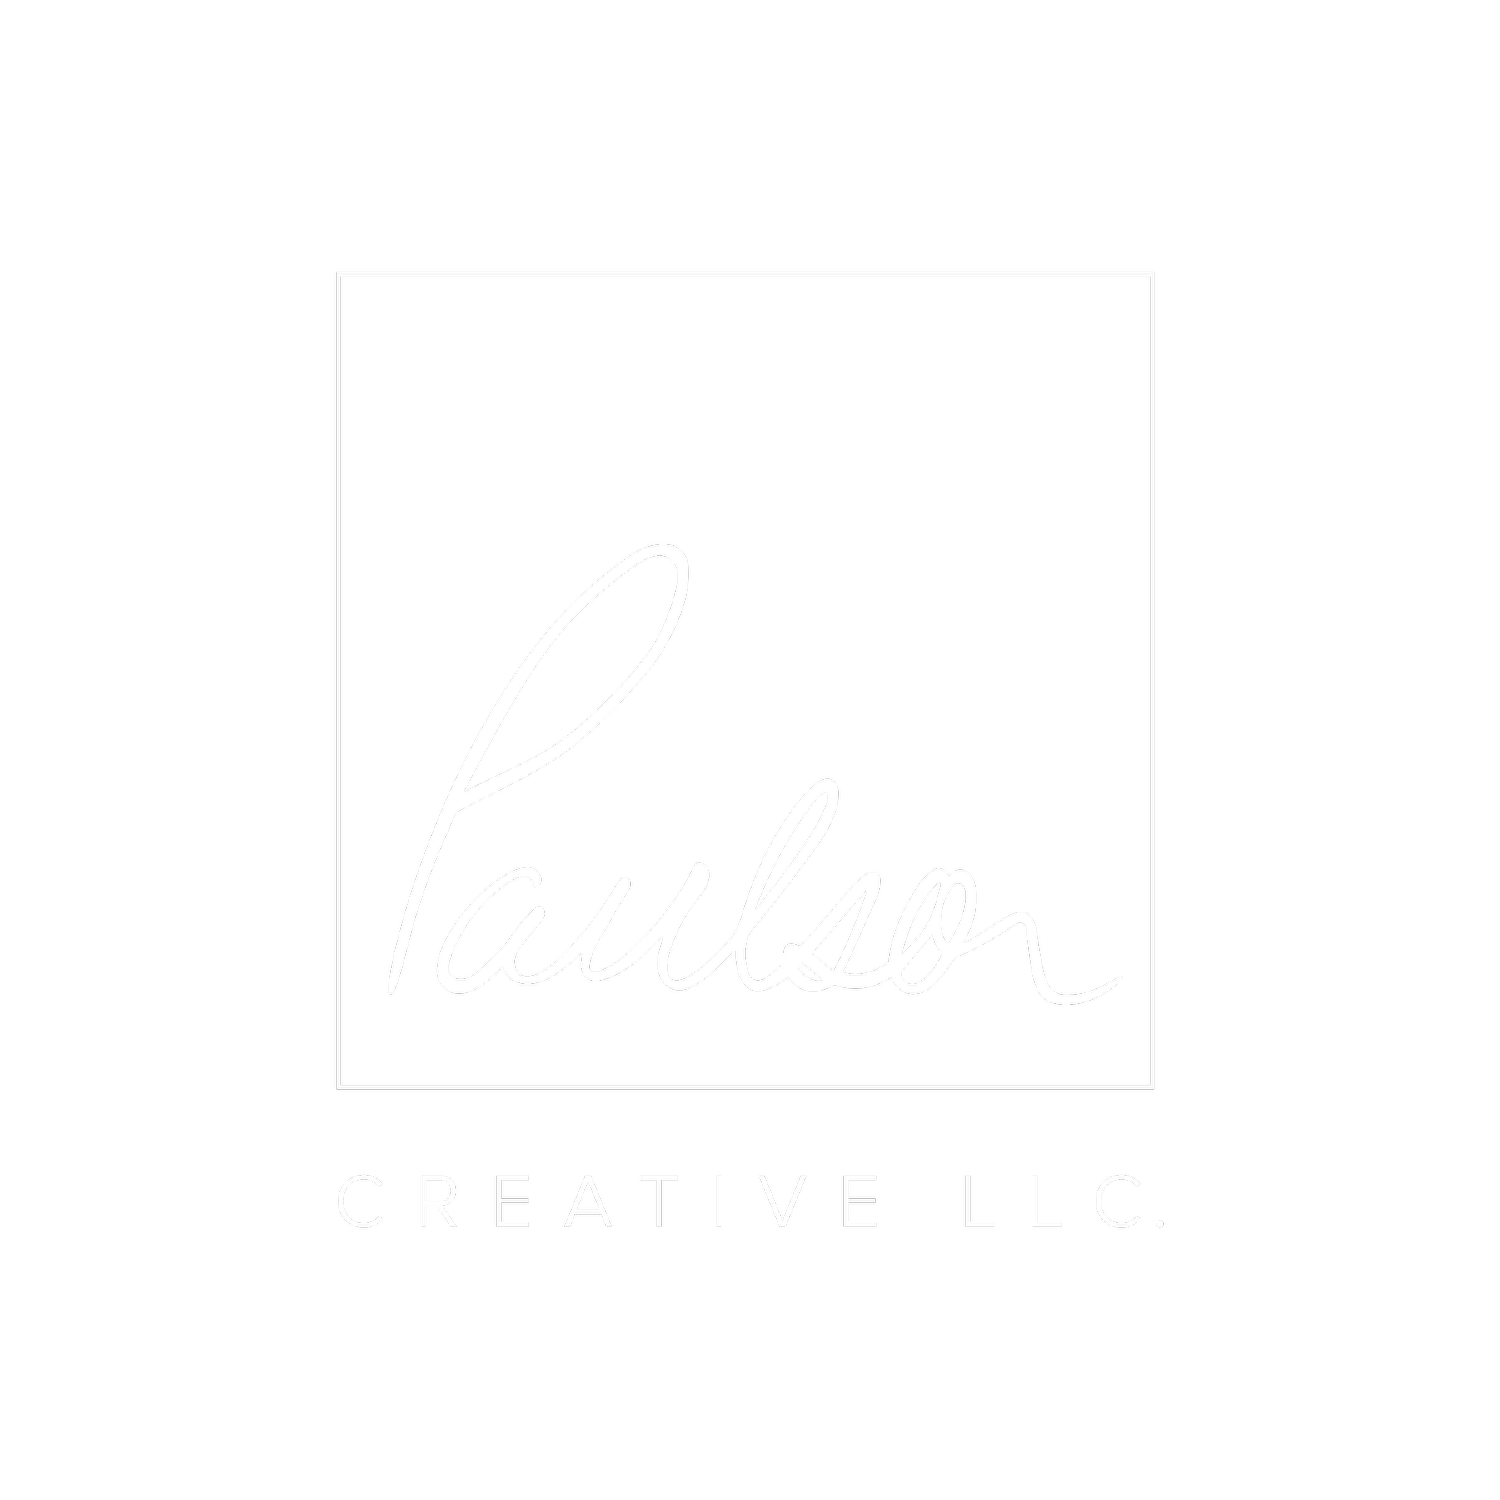 Professional Photography, Videography, and Creative Services